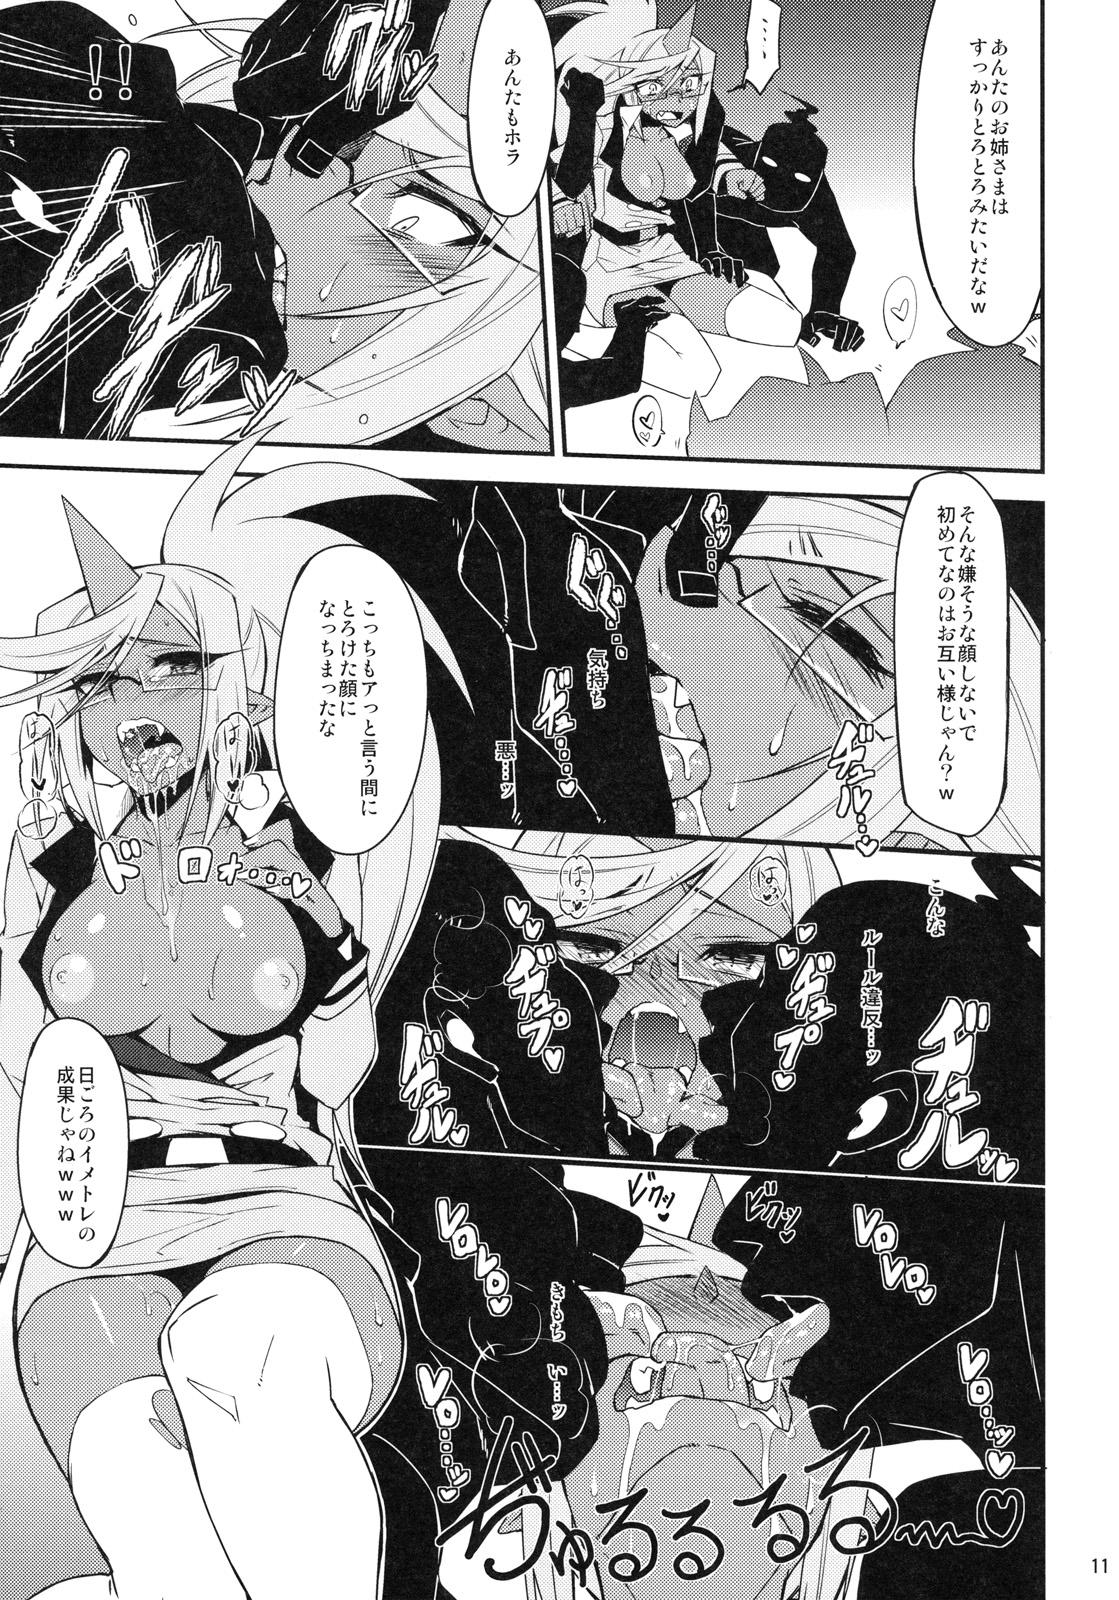 Couples Fucking Virginal Rule - Panty and stocking with garterbelt Job - Page 10